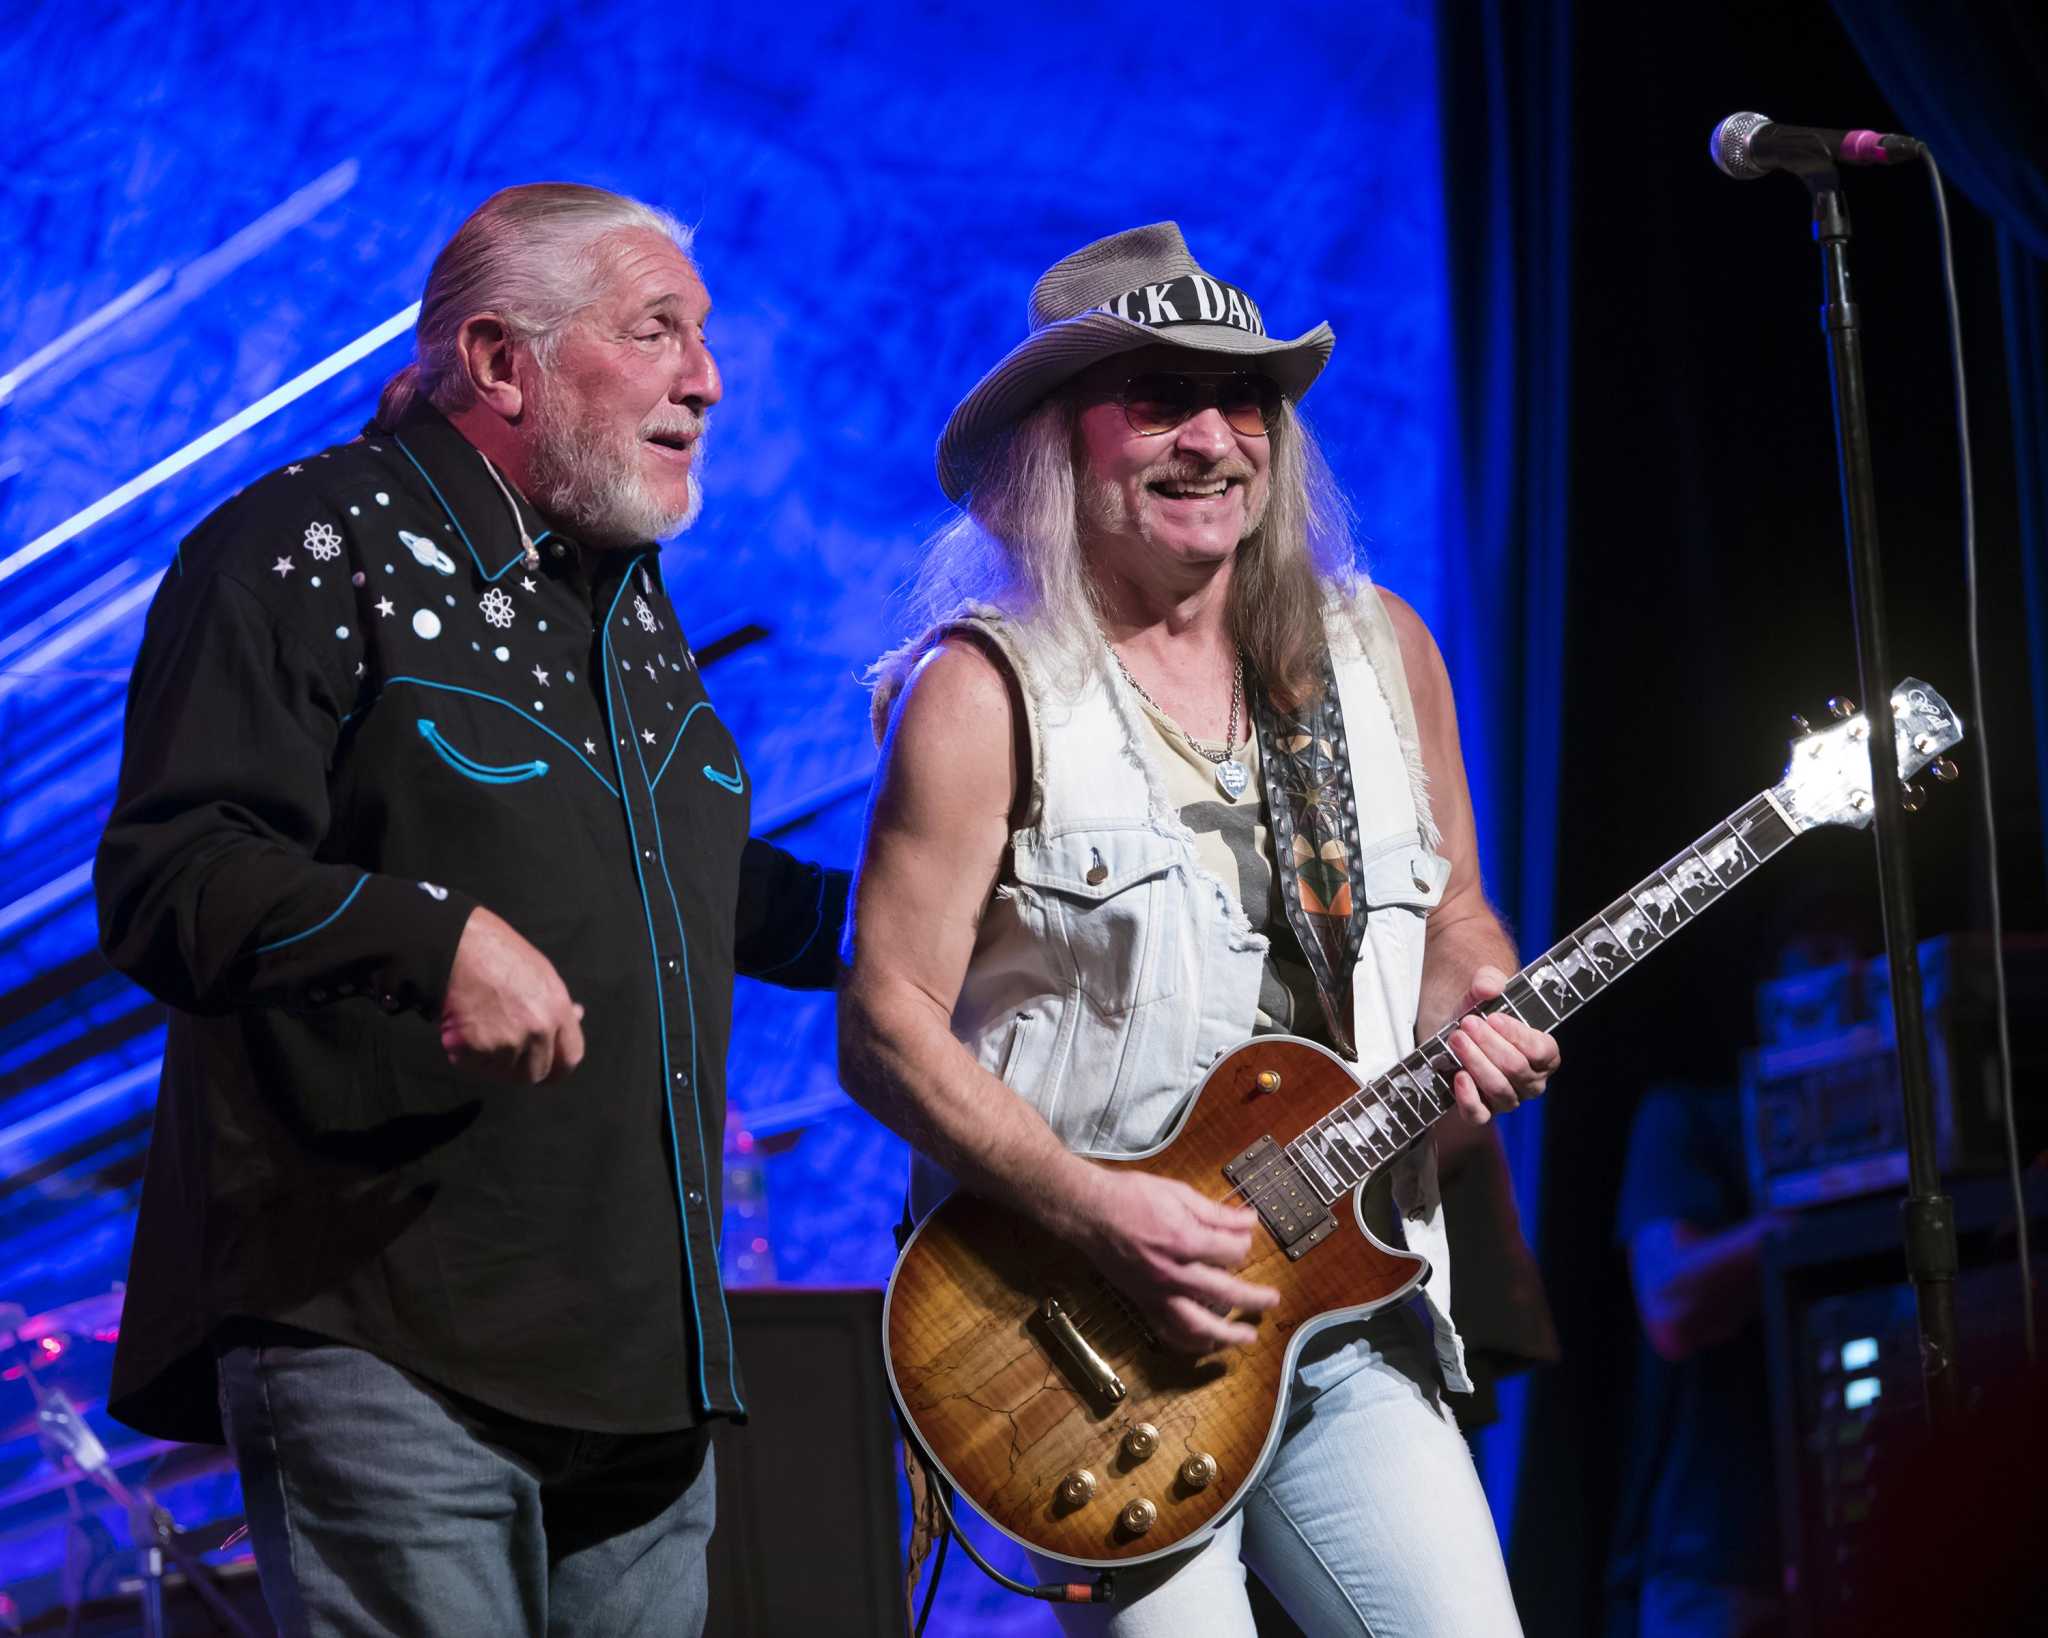 Marshall Tucker Band, The Outlaws stop at Stamford’s Palace Theatre